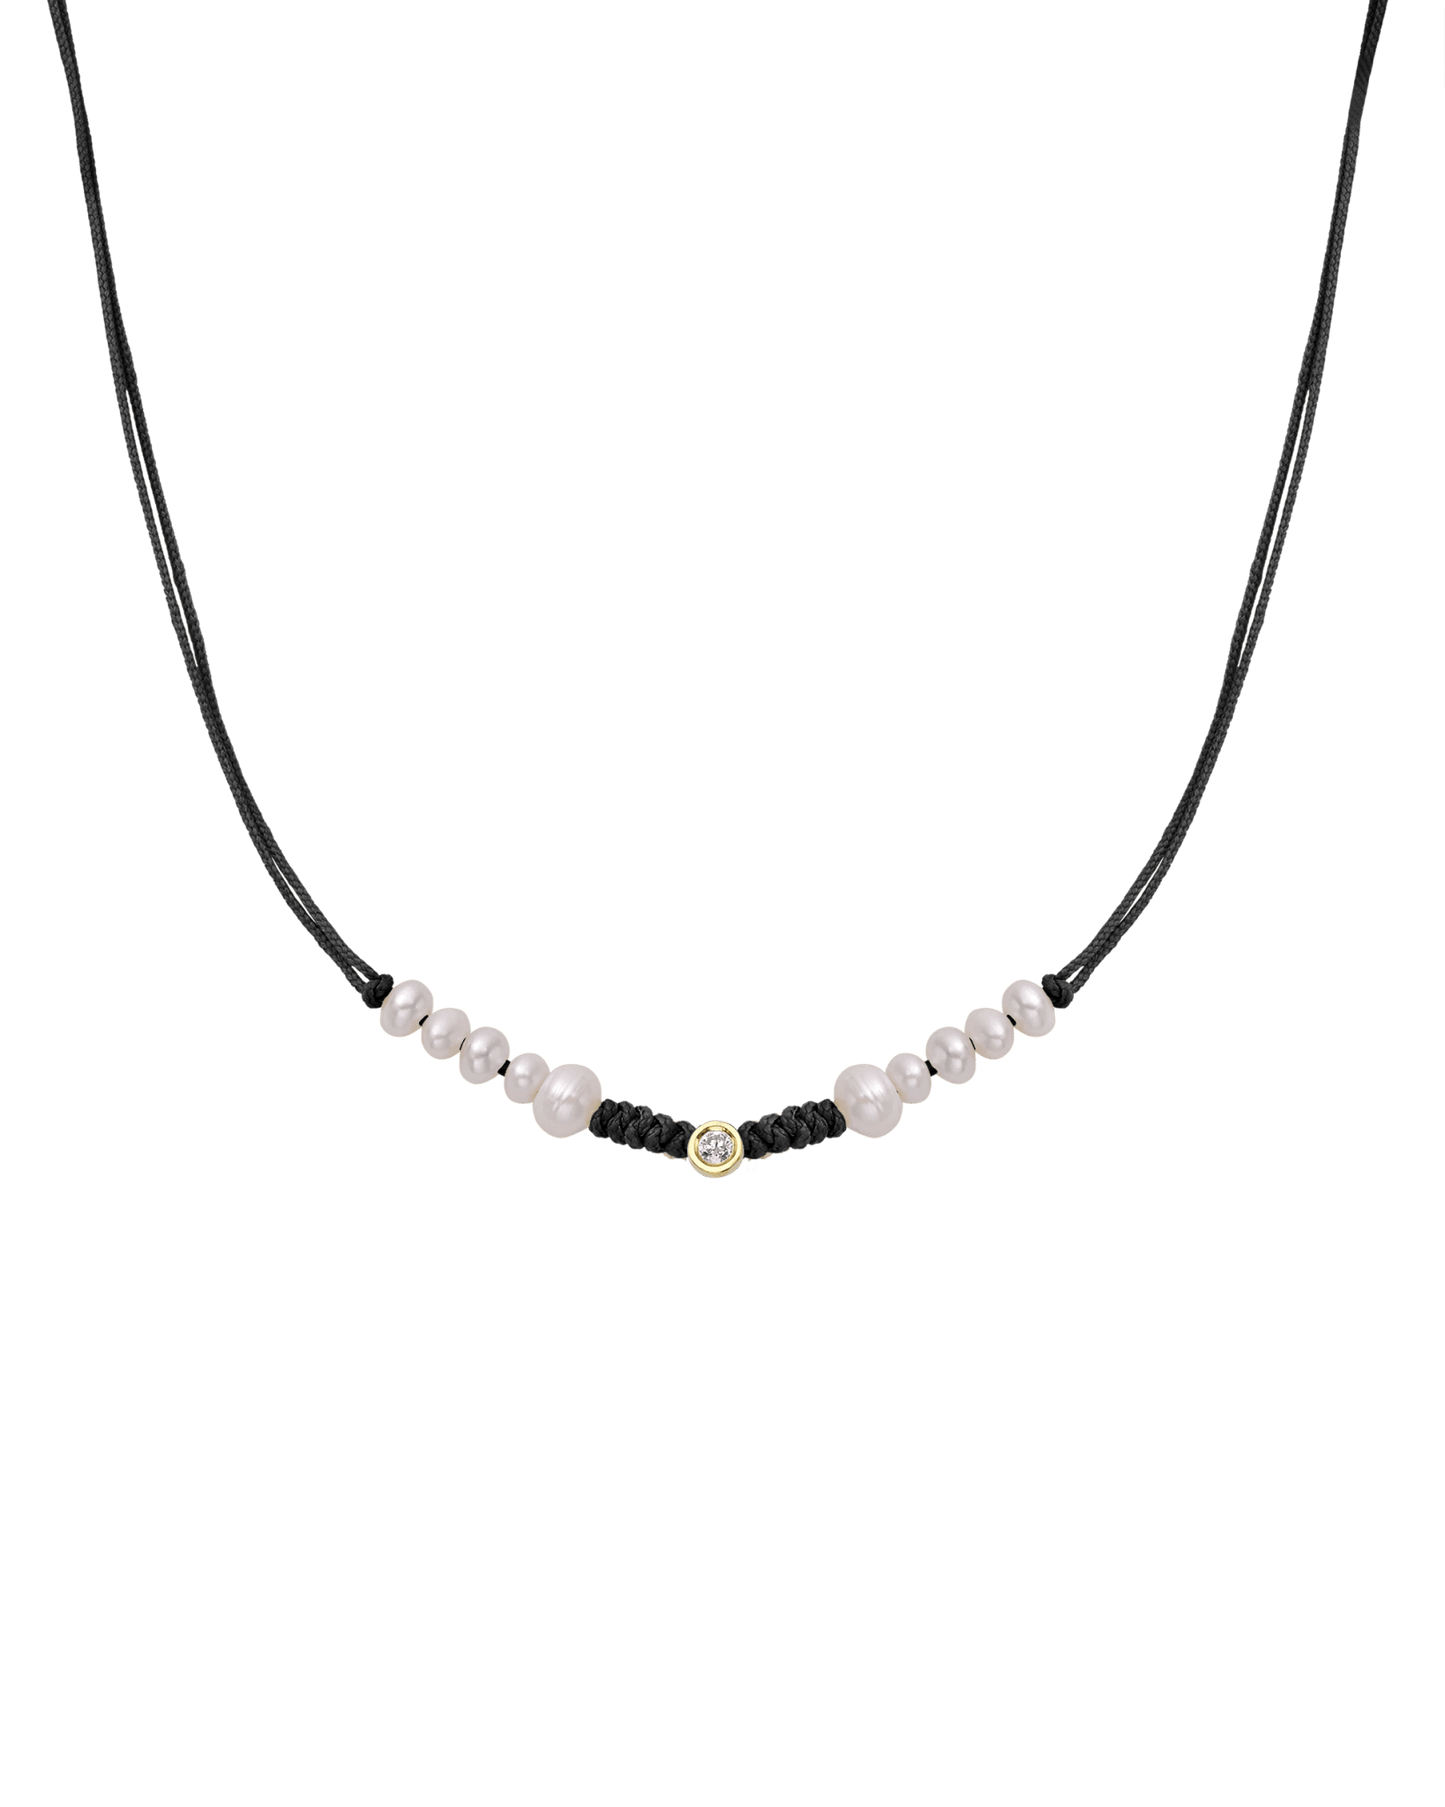 Ten Natural Pearl String of Love Necklace - 14K Yellow Gold Necklaces 14K Solid Gold Black Medium: 0.04ct 